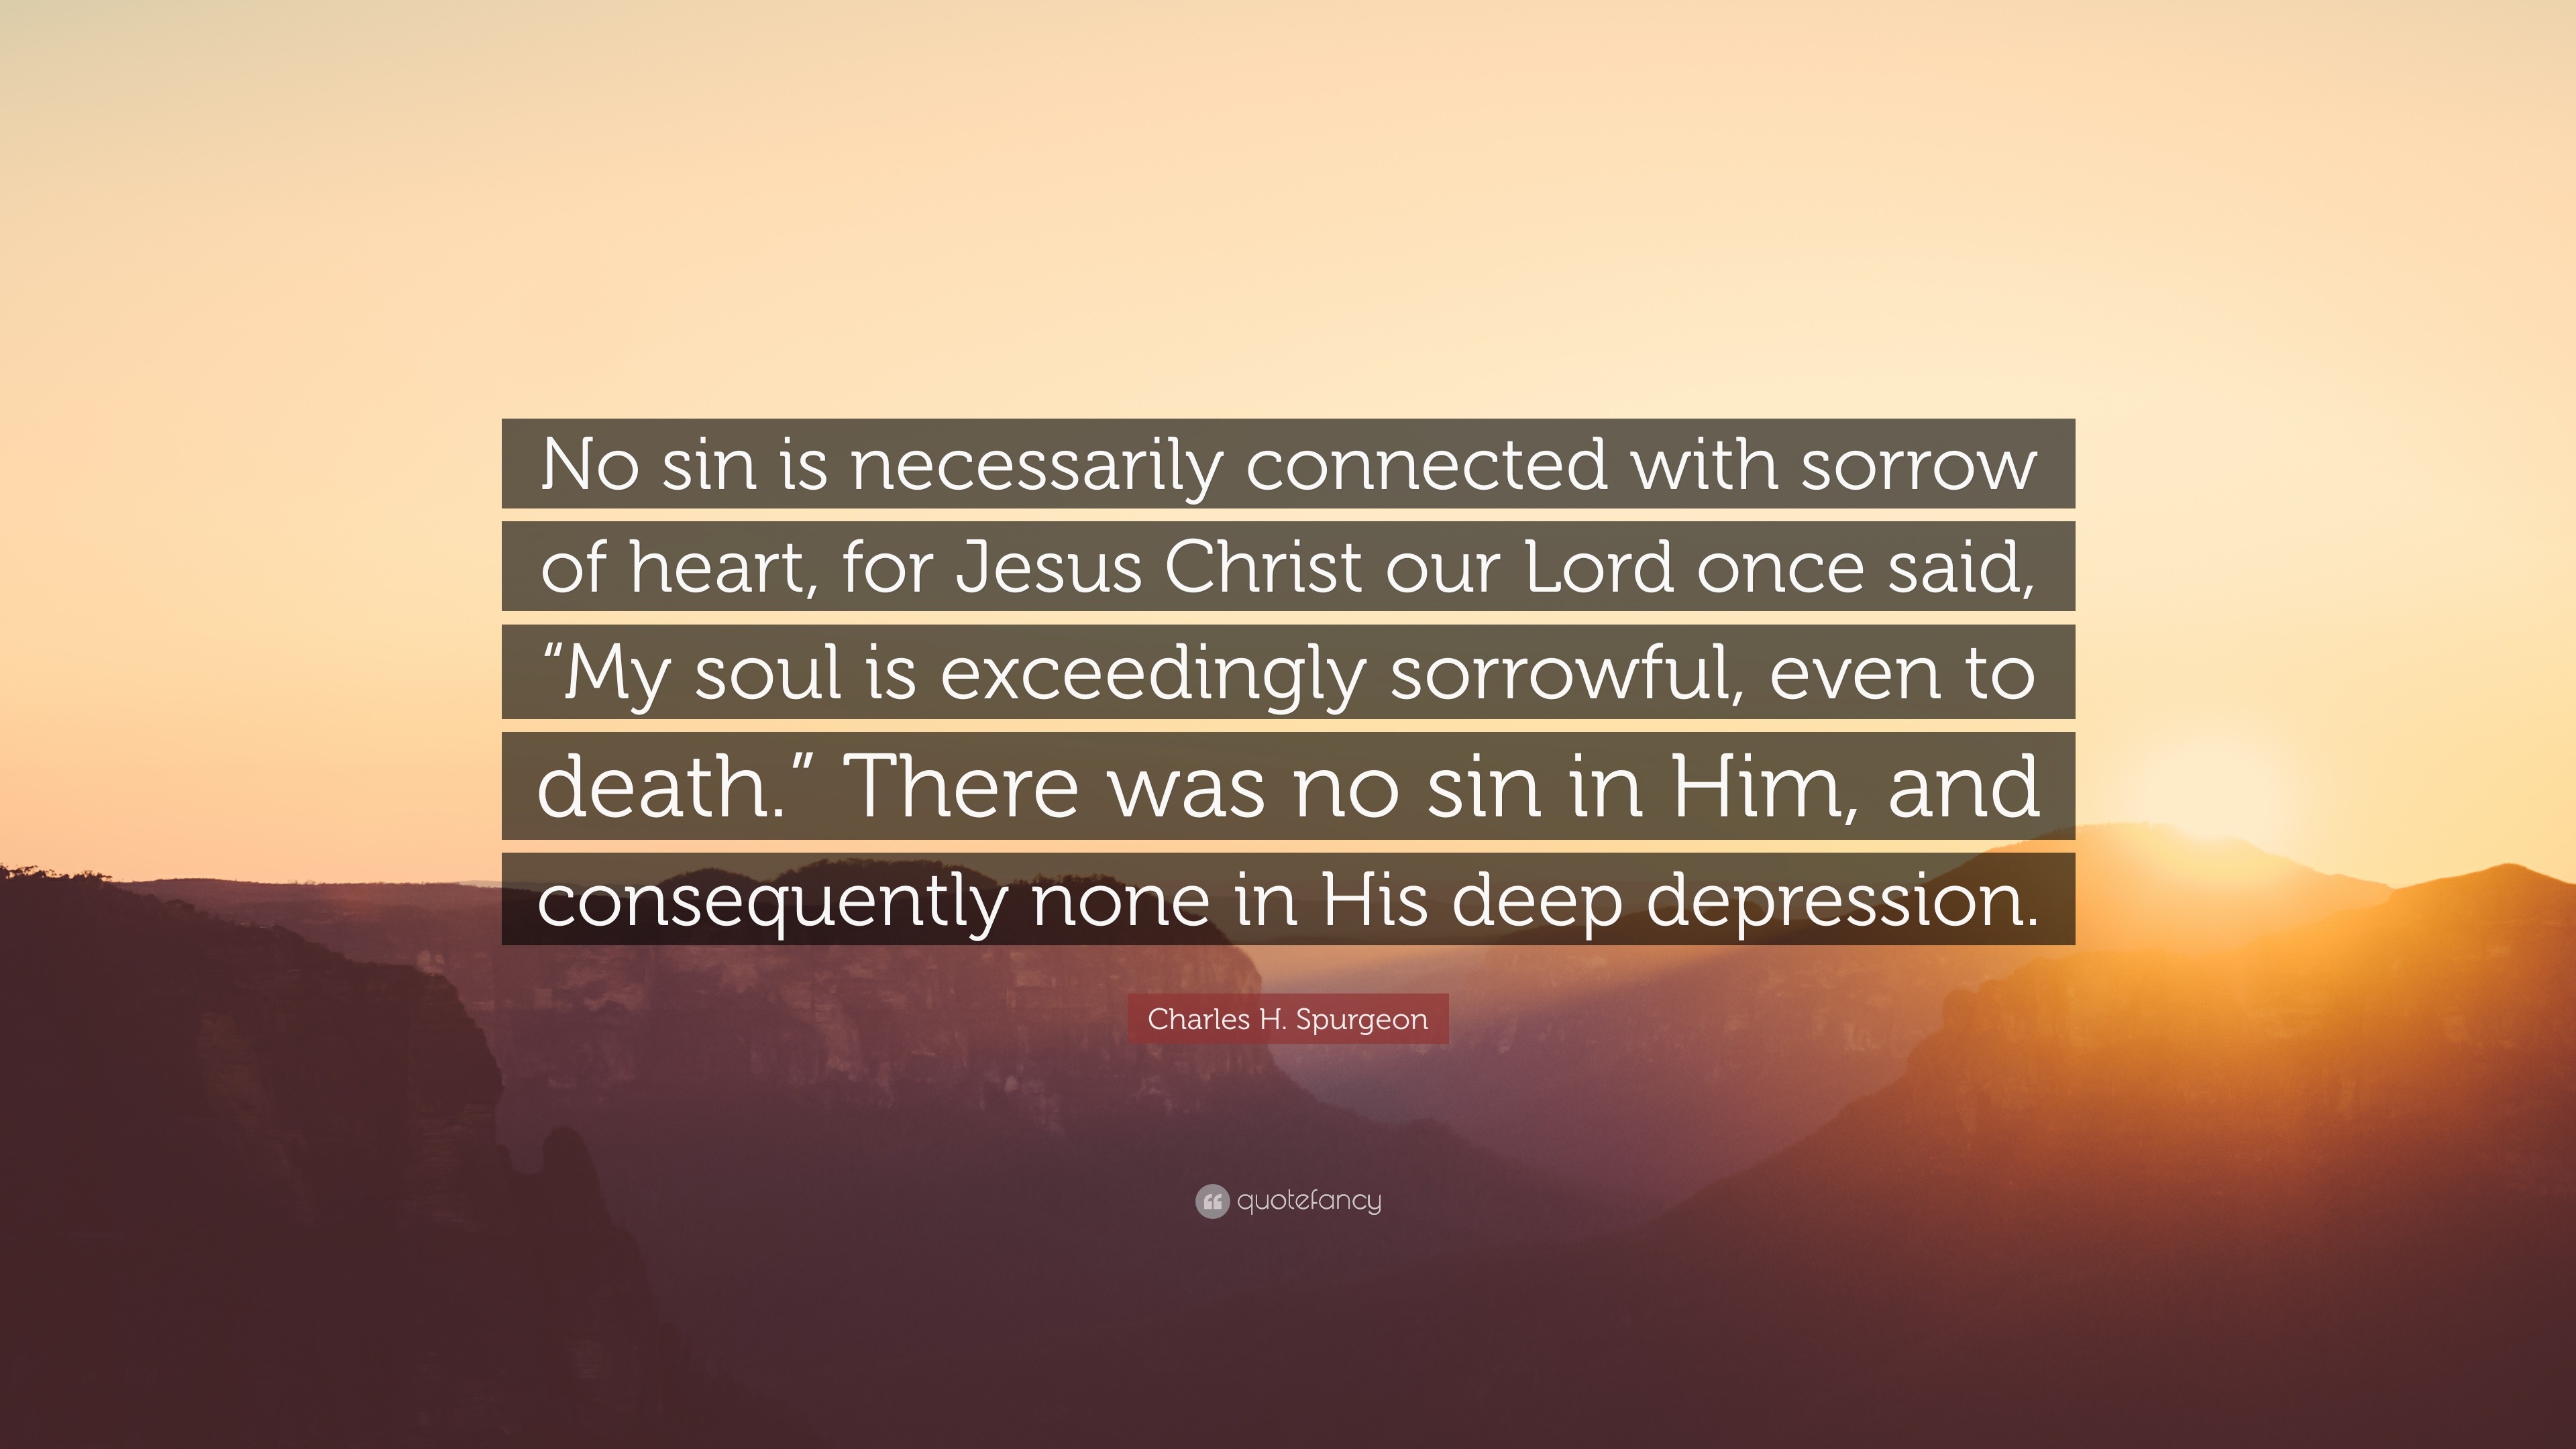 1836708 Charles H Spurgeon Quote No sin is necessarily connected with